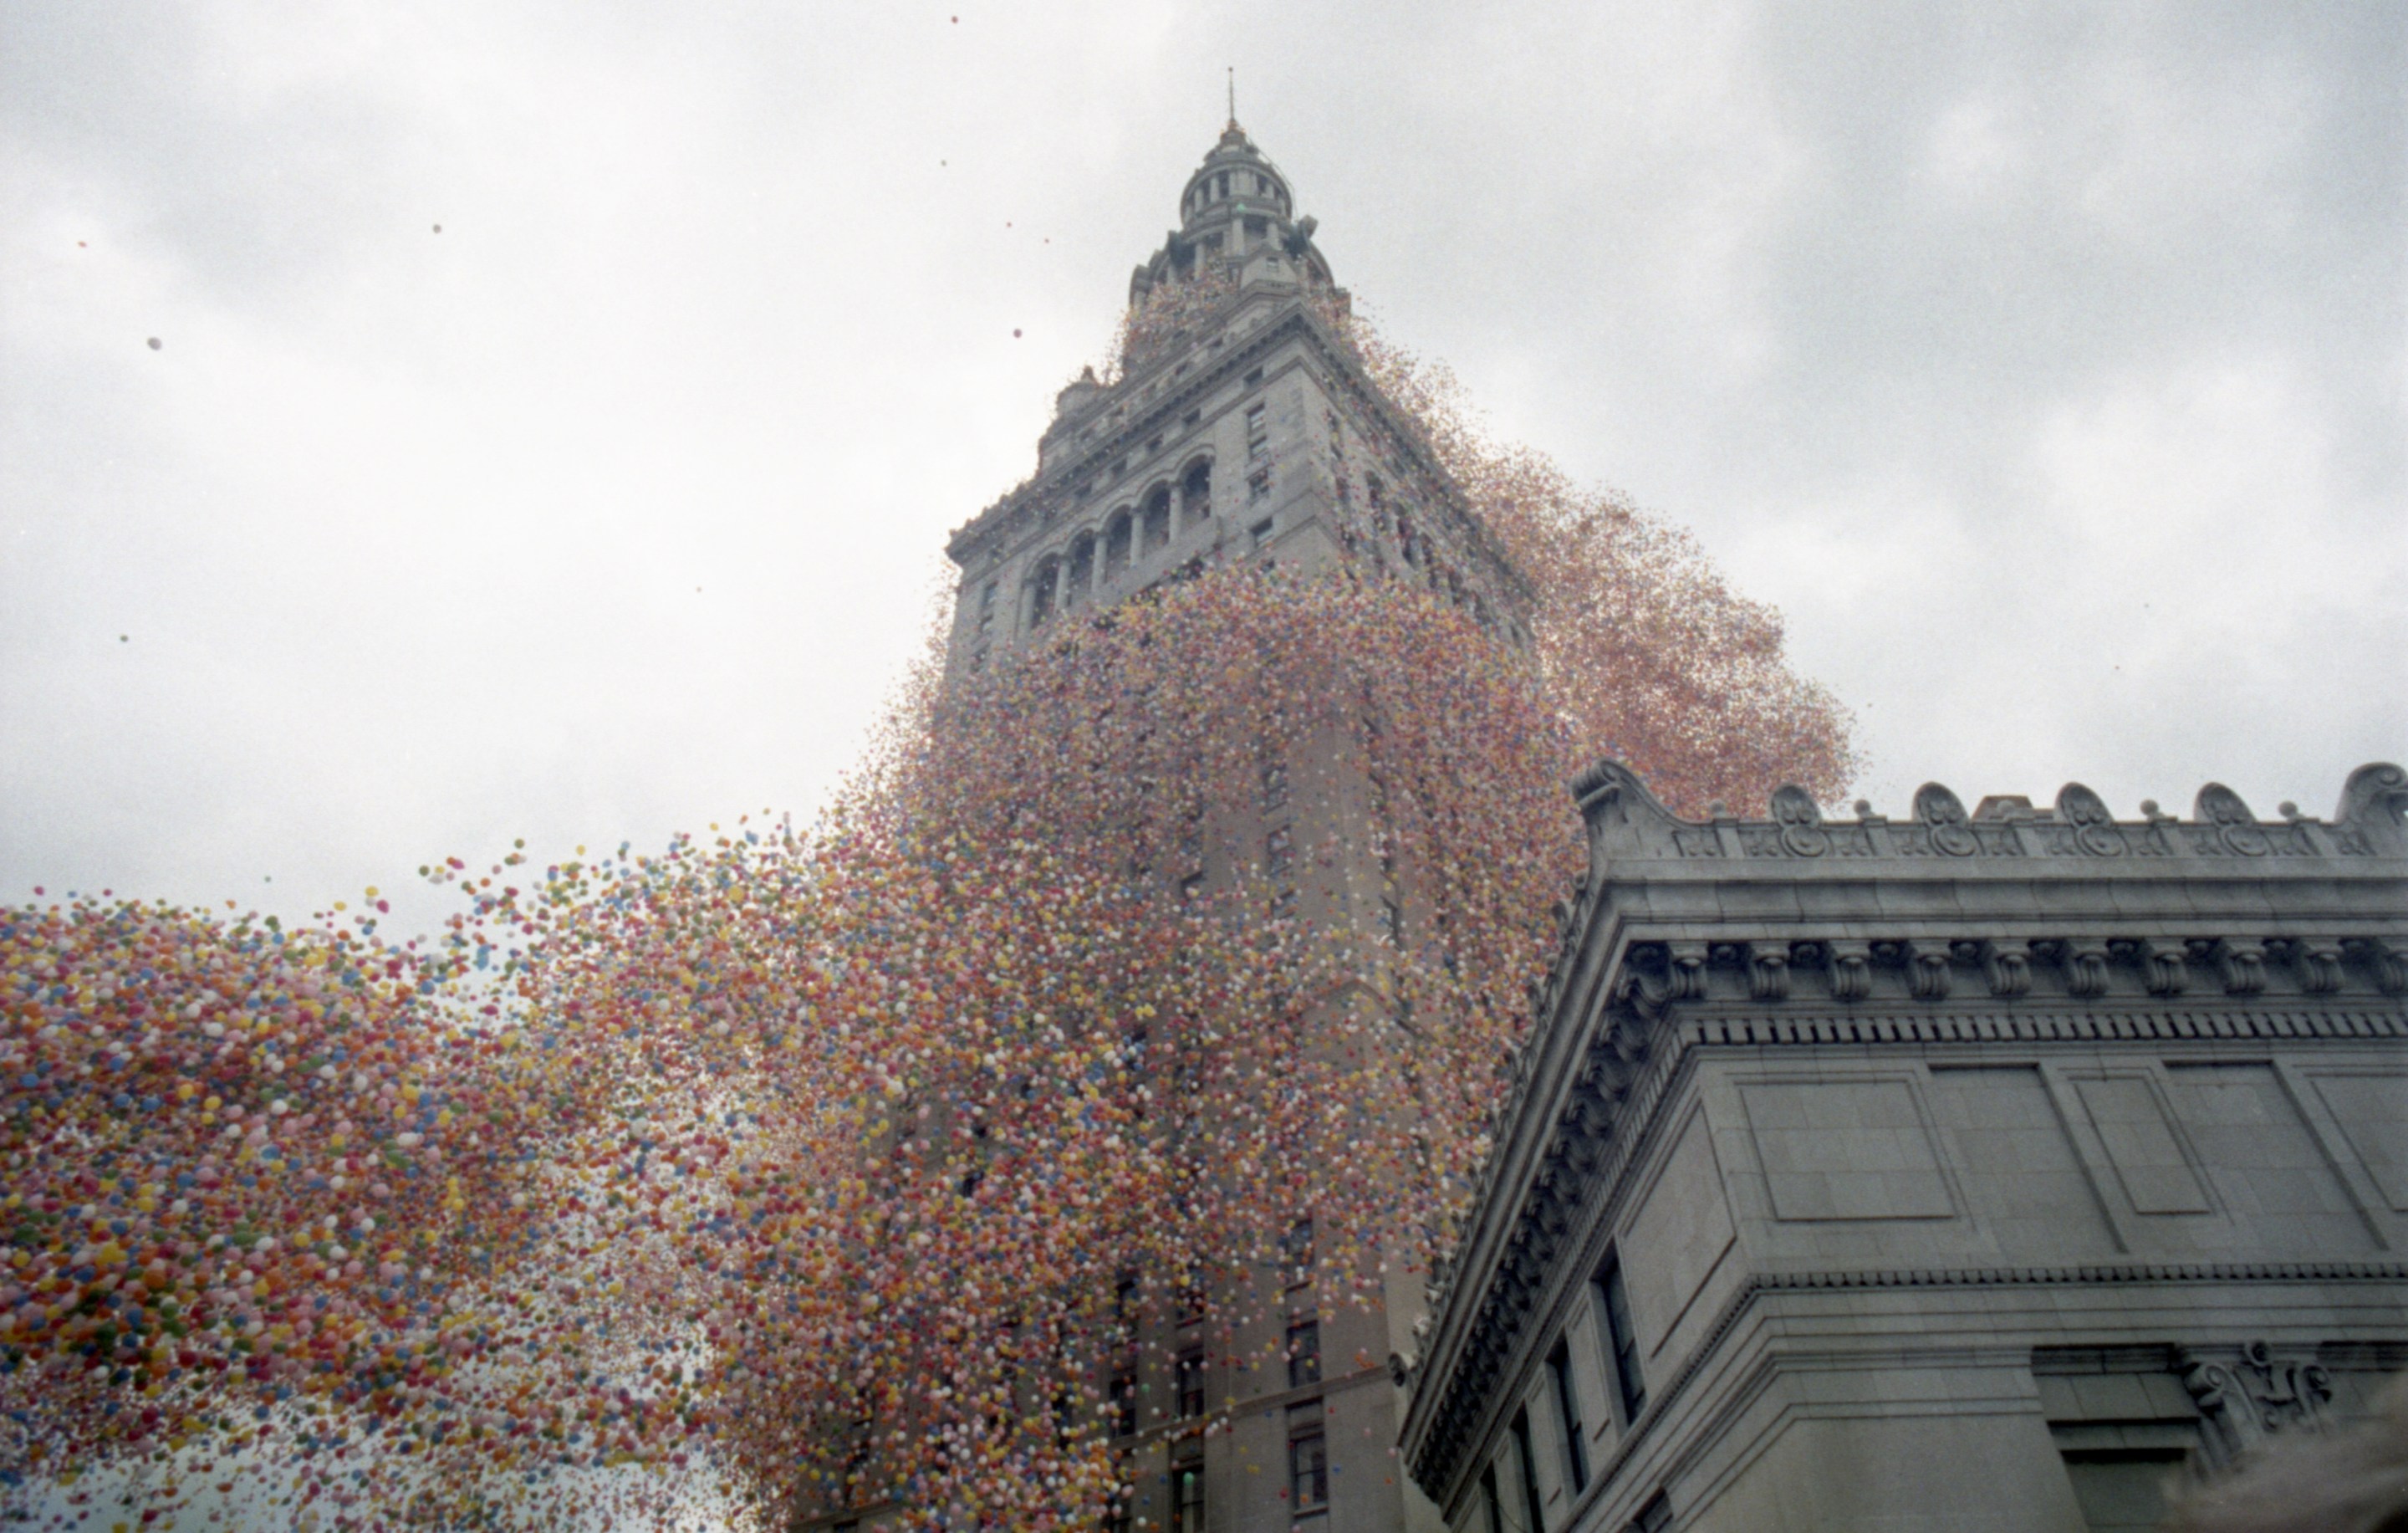 Balloons, 1.5 million of them, curl around the Terminal Tower Building during Balloonfest '86 sponsored by the United Ways Services of Cleveland. The lift off will be entered into the Guinness World Book of Records.(Photo by Bettmann Archive/Getty Images)